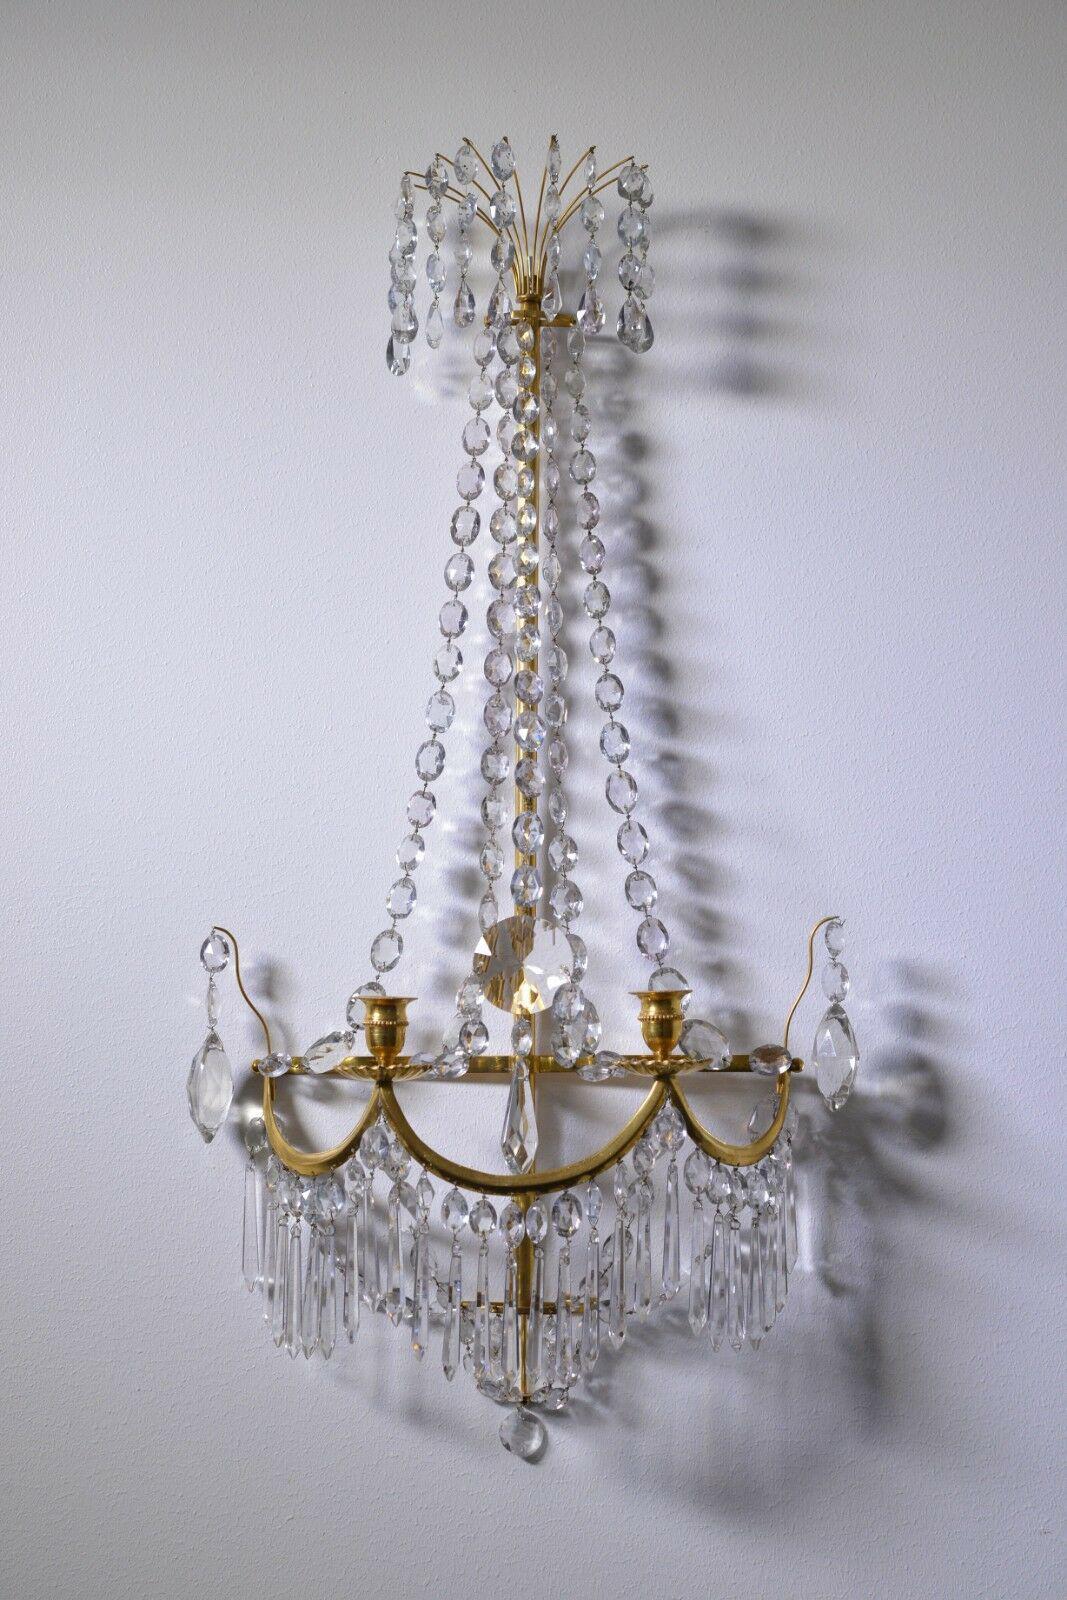 Quite a Rare Pair of Early 19thc c1810 Russian Baltic 24K Gold with Cut Crystal Wall Sconces. In their original unelectrified state. I purchased these while I was in Ireland. They are gorgeous!